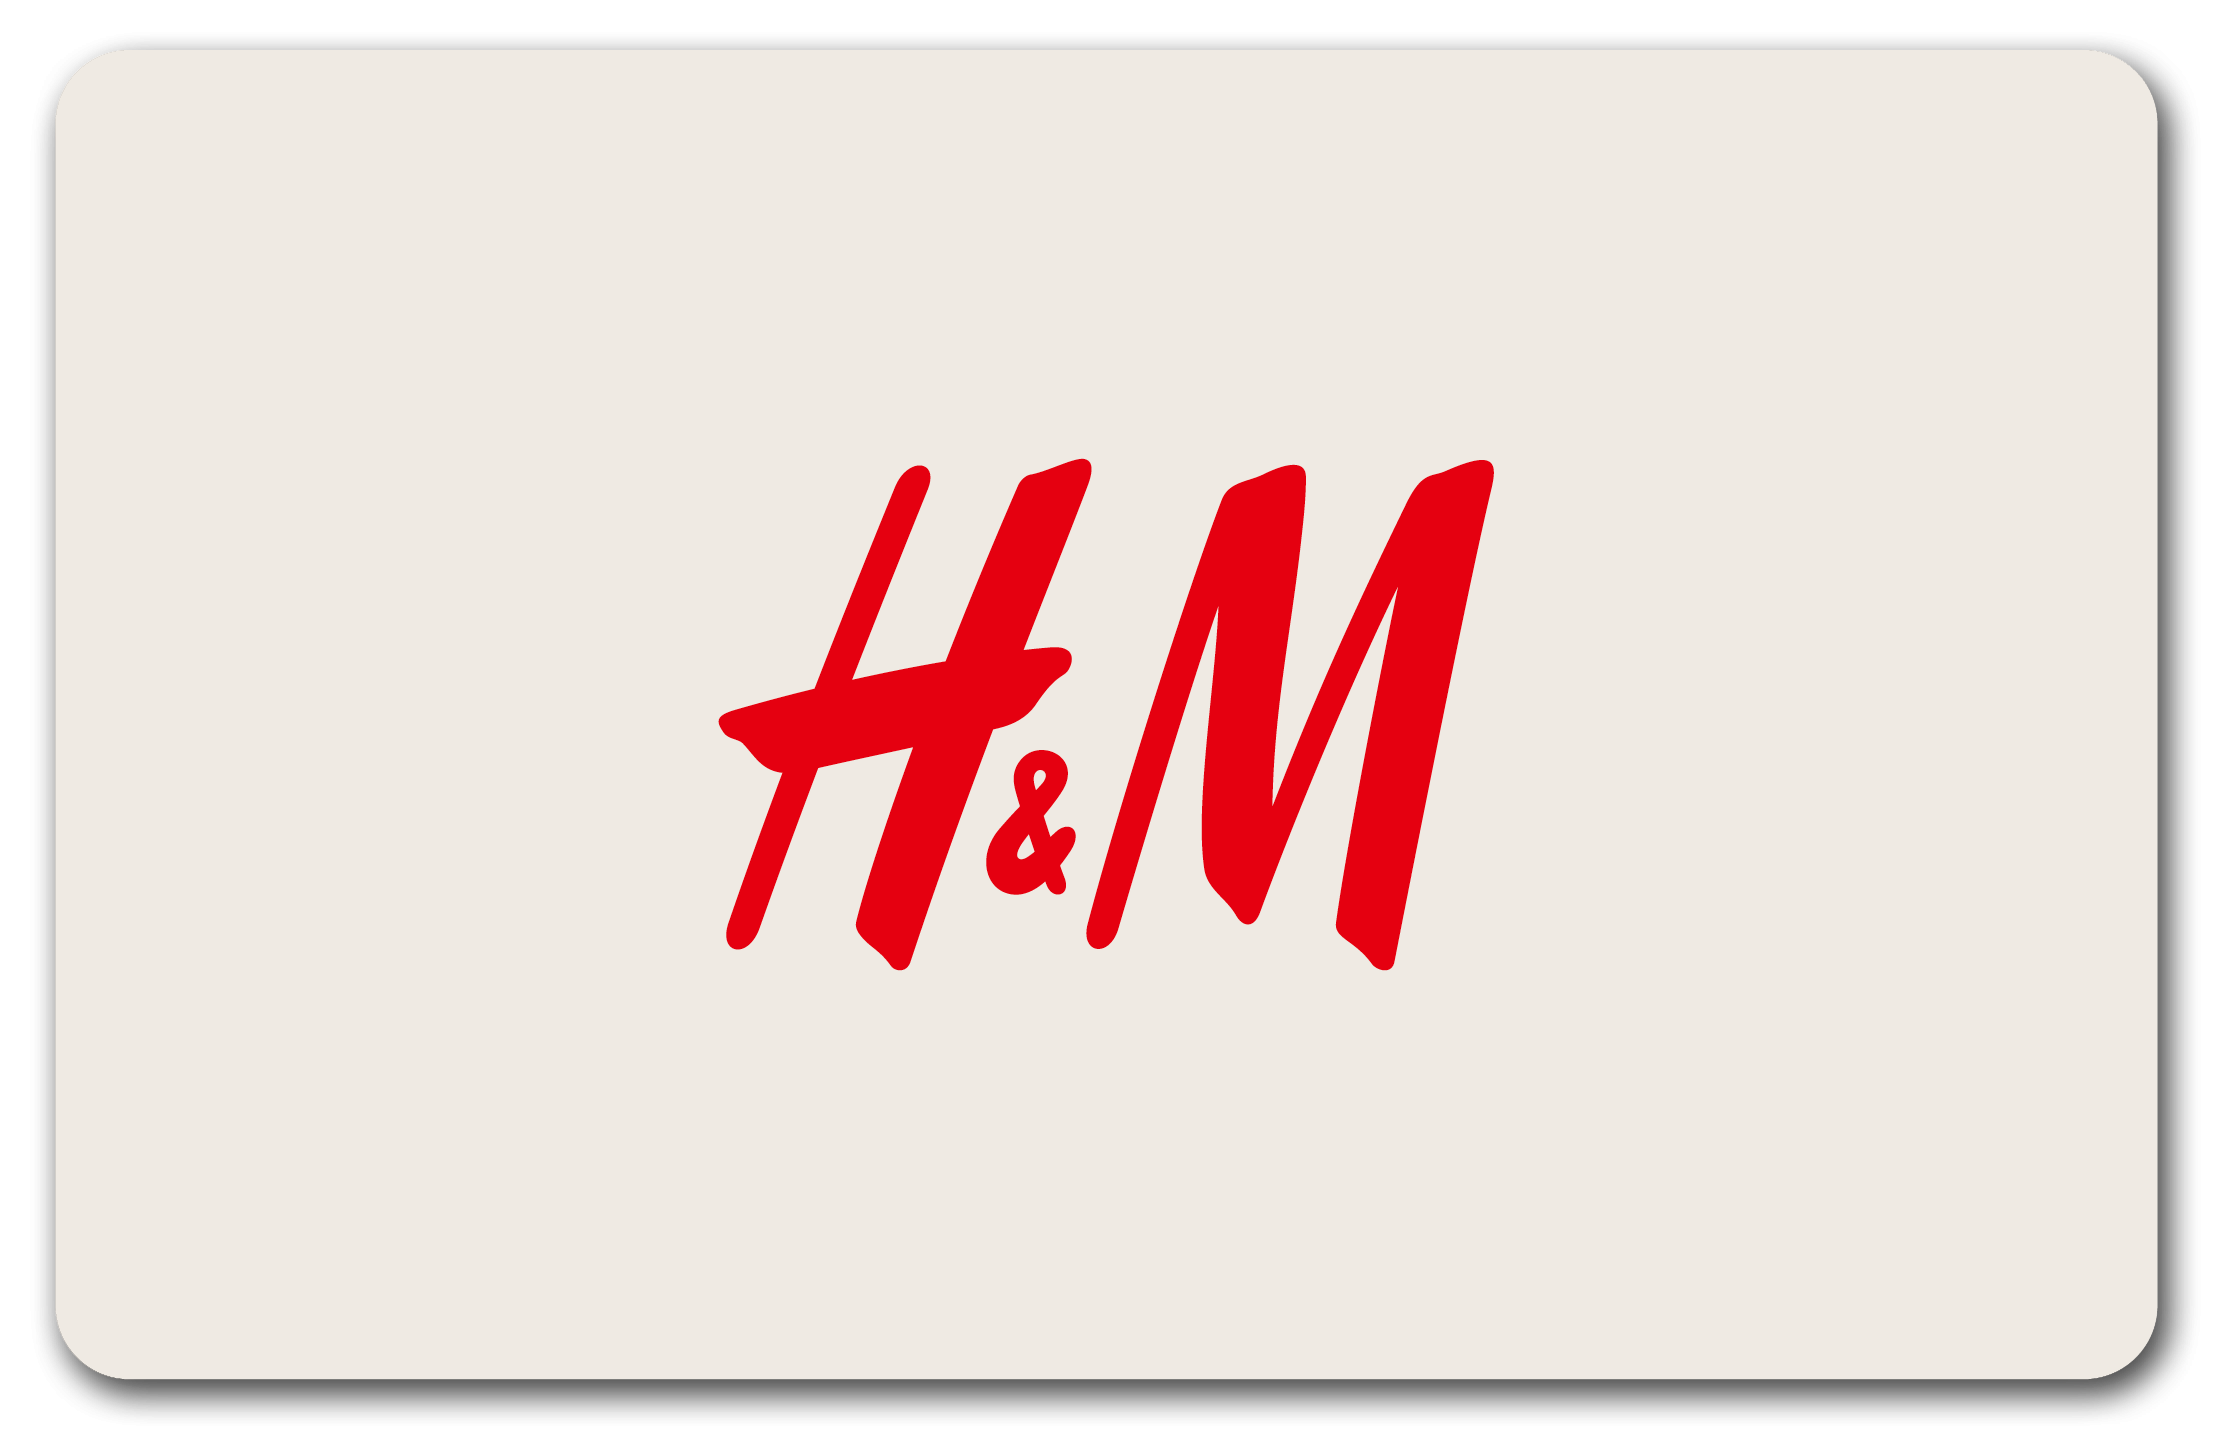 H&M Narbonne